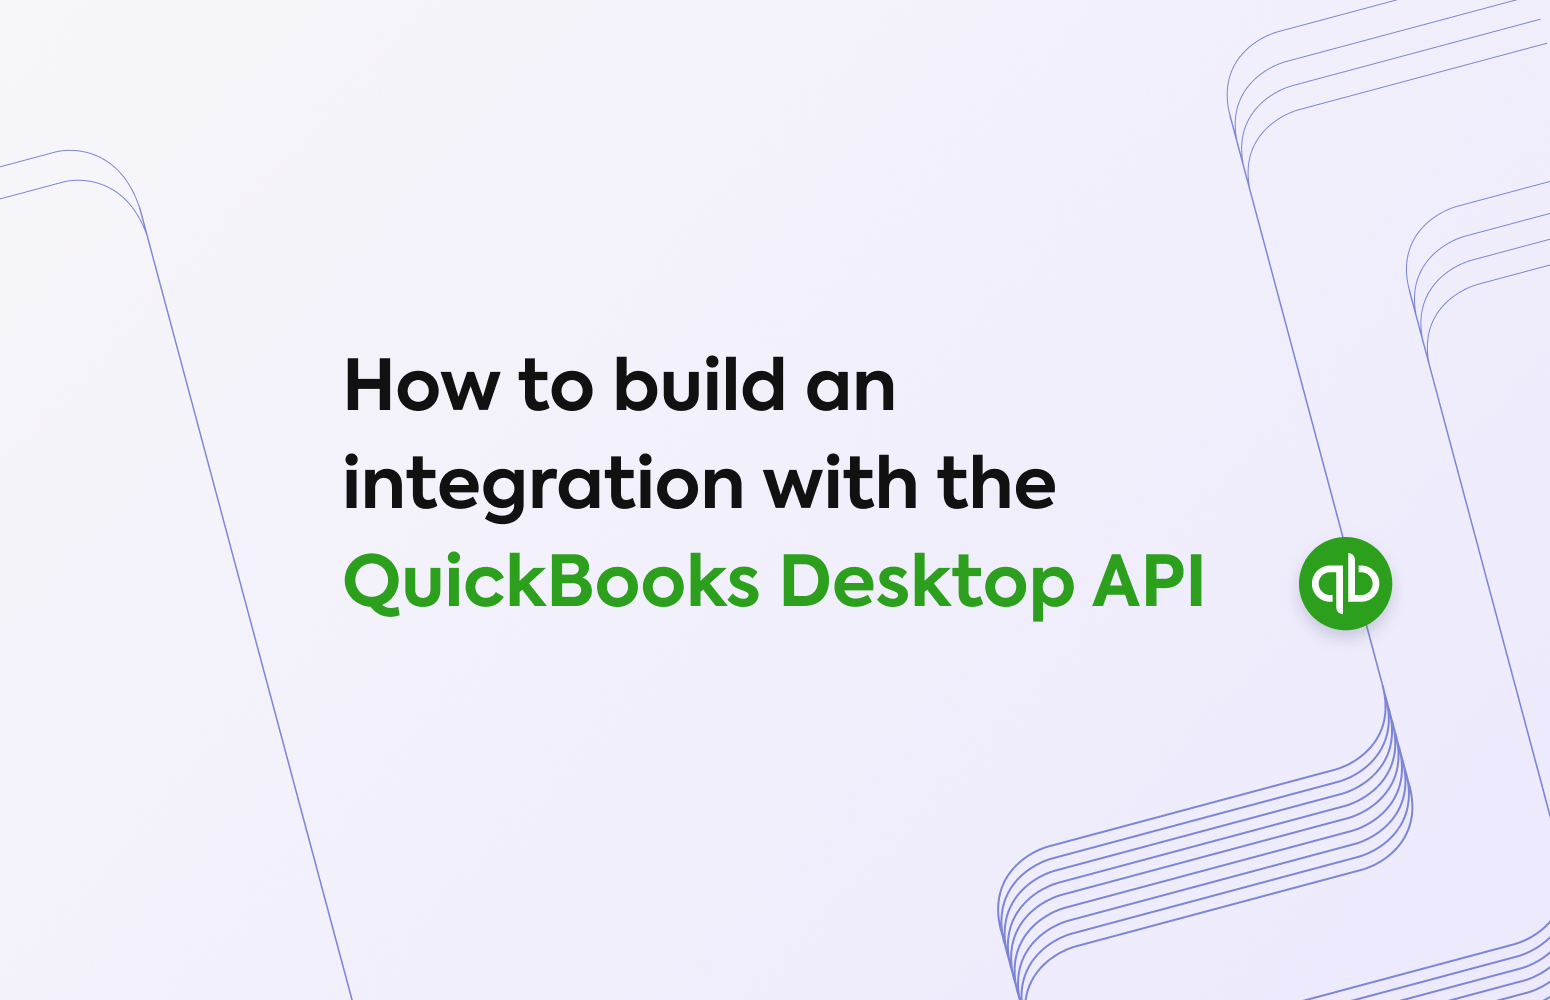 How to build an integration with the QuickBooks Desktop API